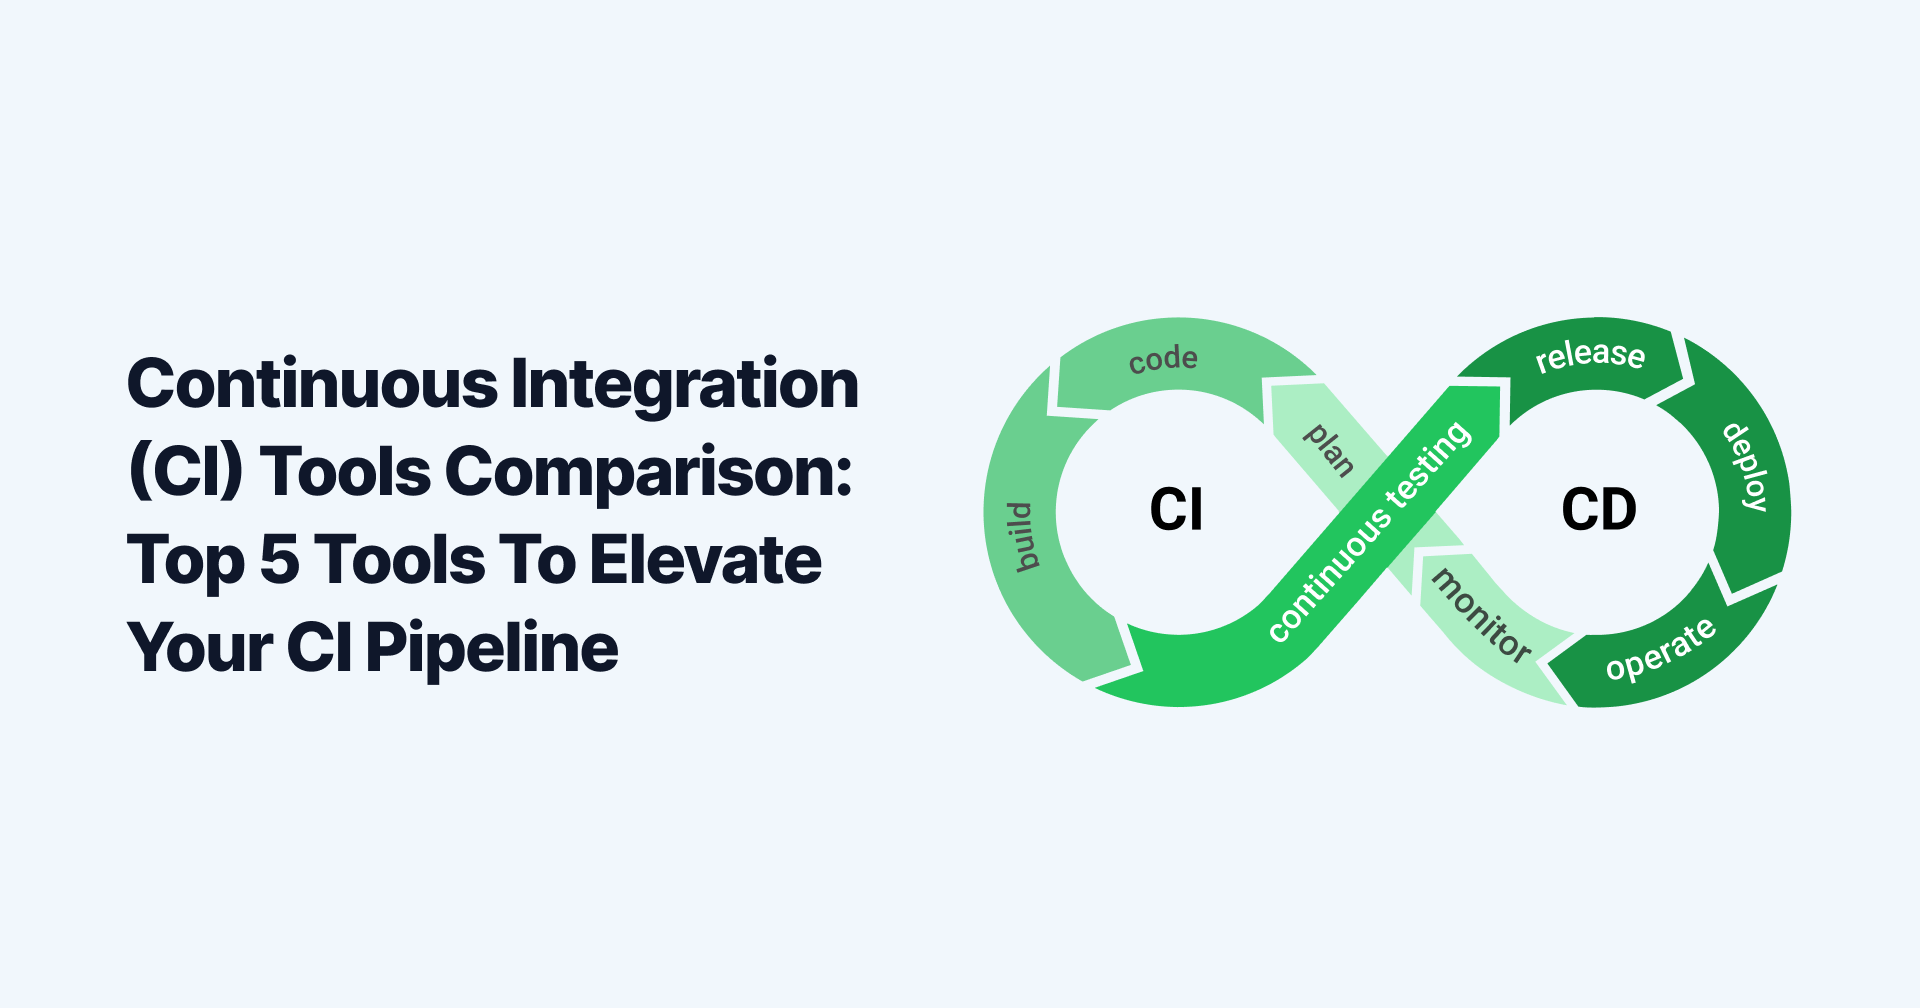 Continuous Integration (CI) Tools Comparison: Top 5 Tools To Elevate Your CI Pipeline